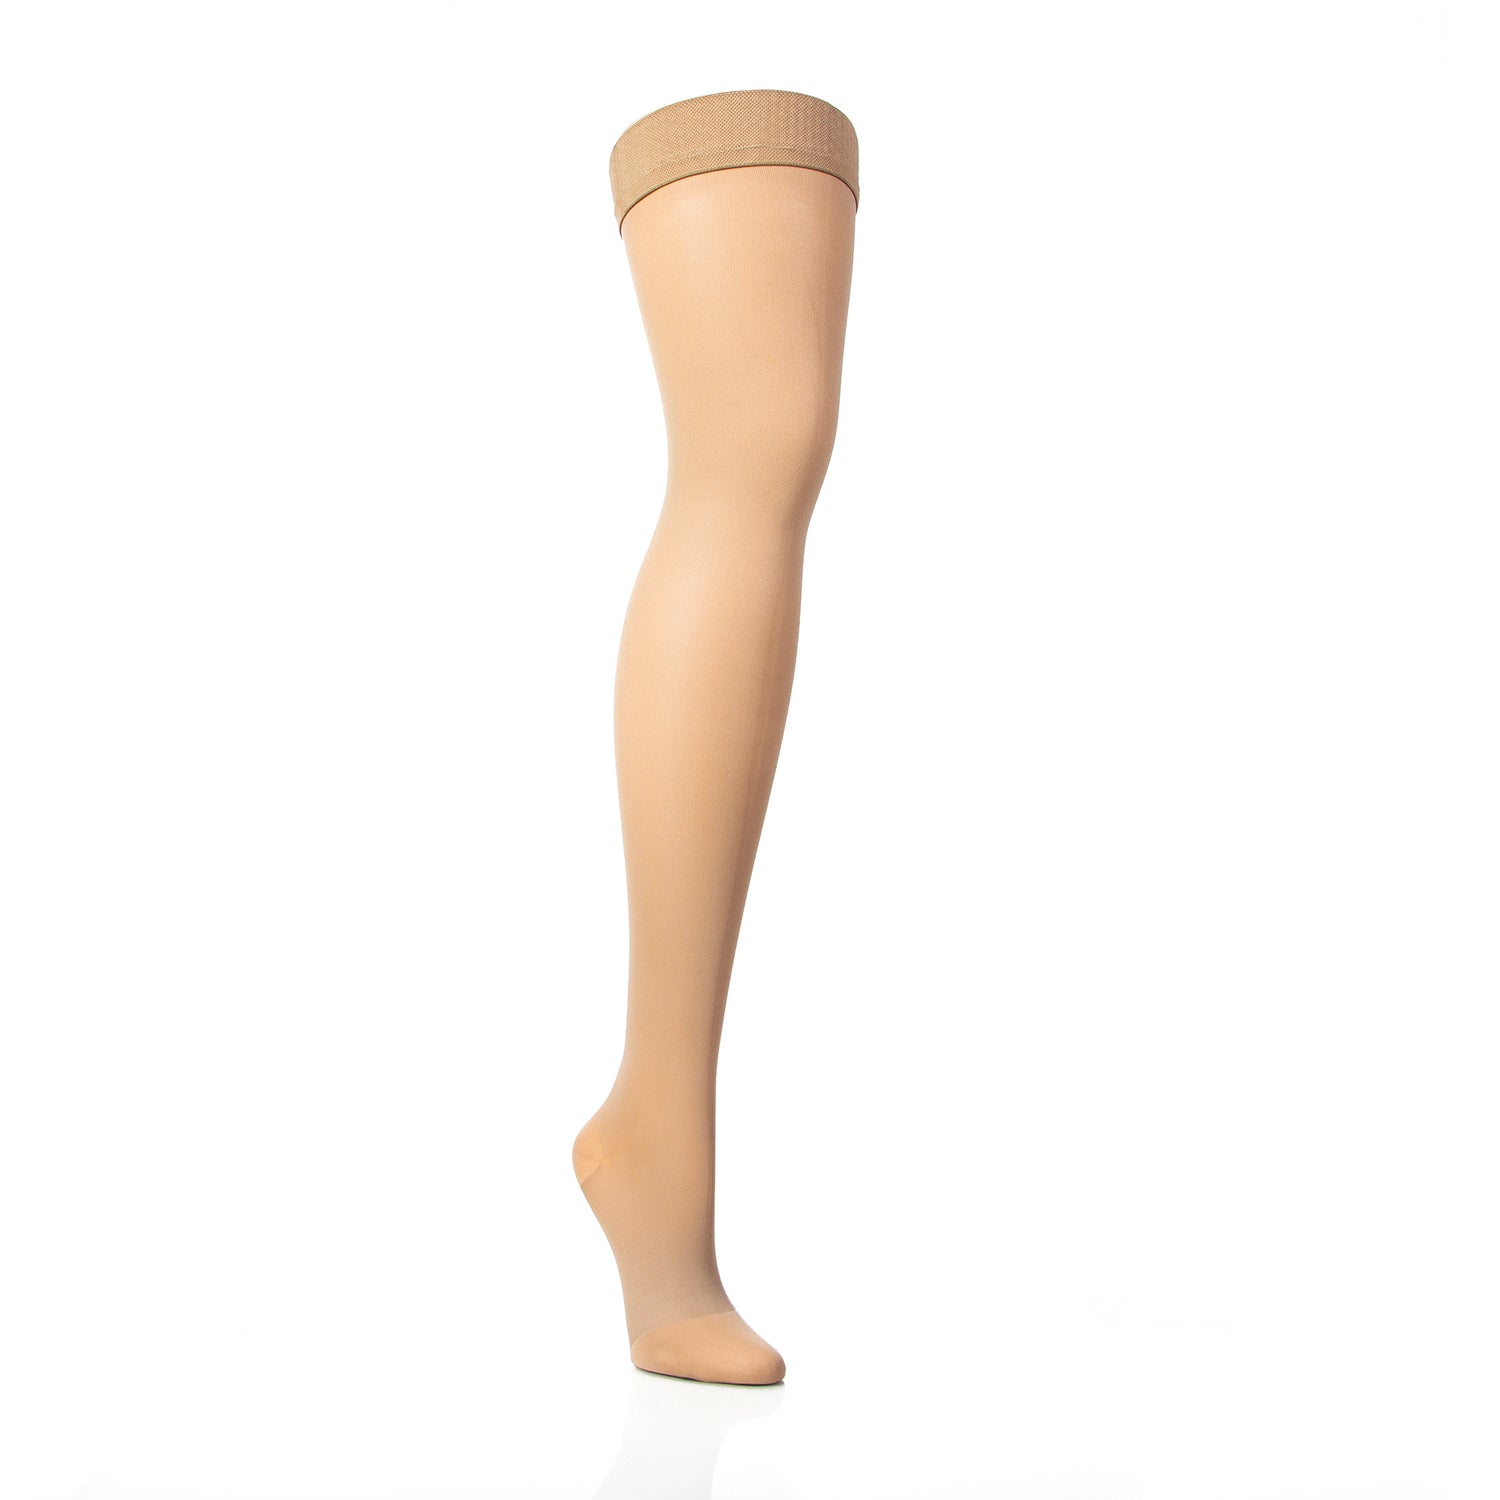 Thigh High Compression Socks For Women In 20 30 mmHg Circutrend